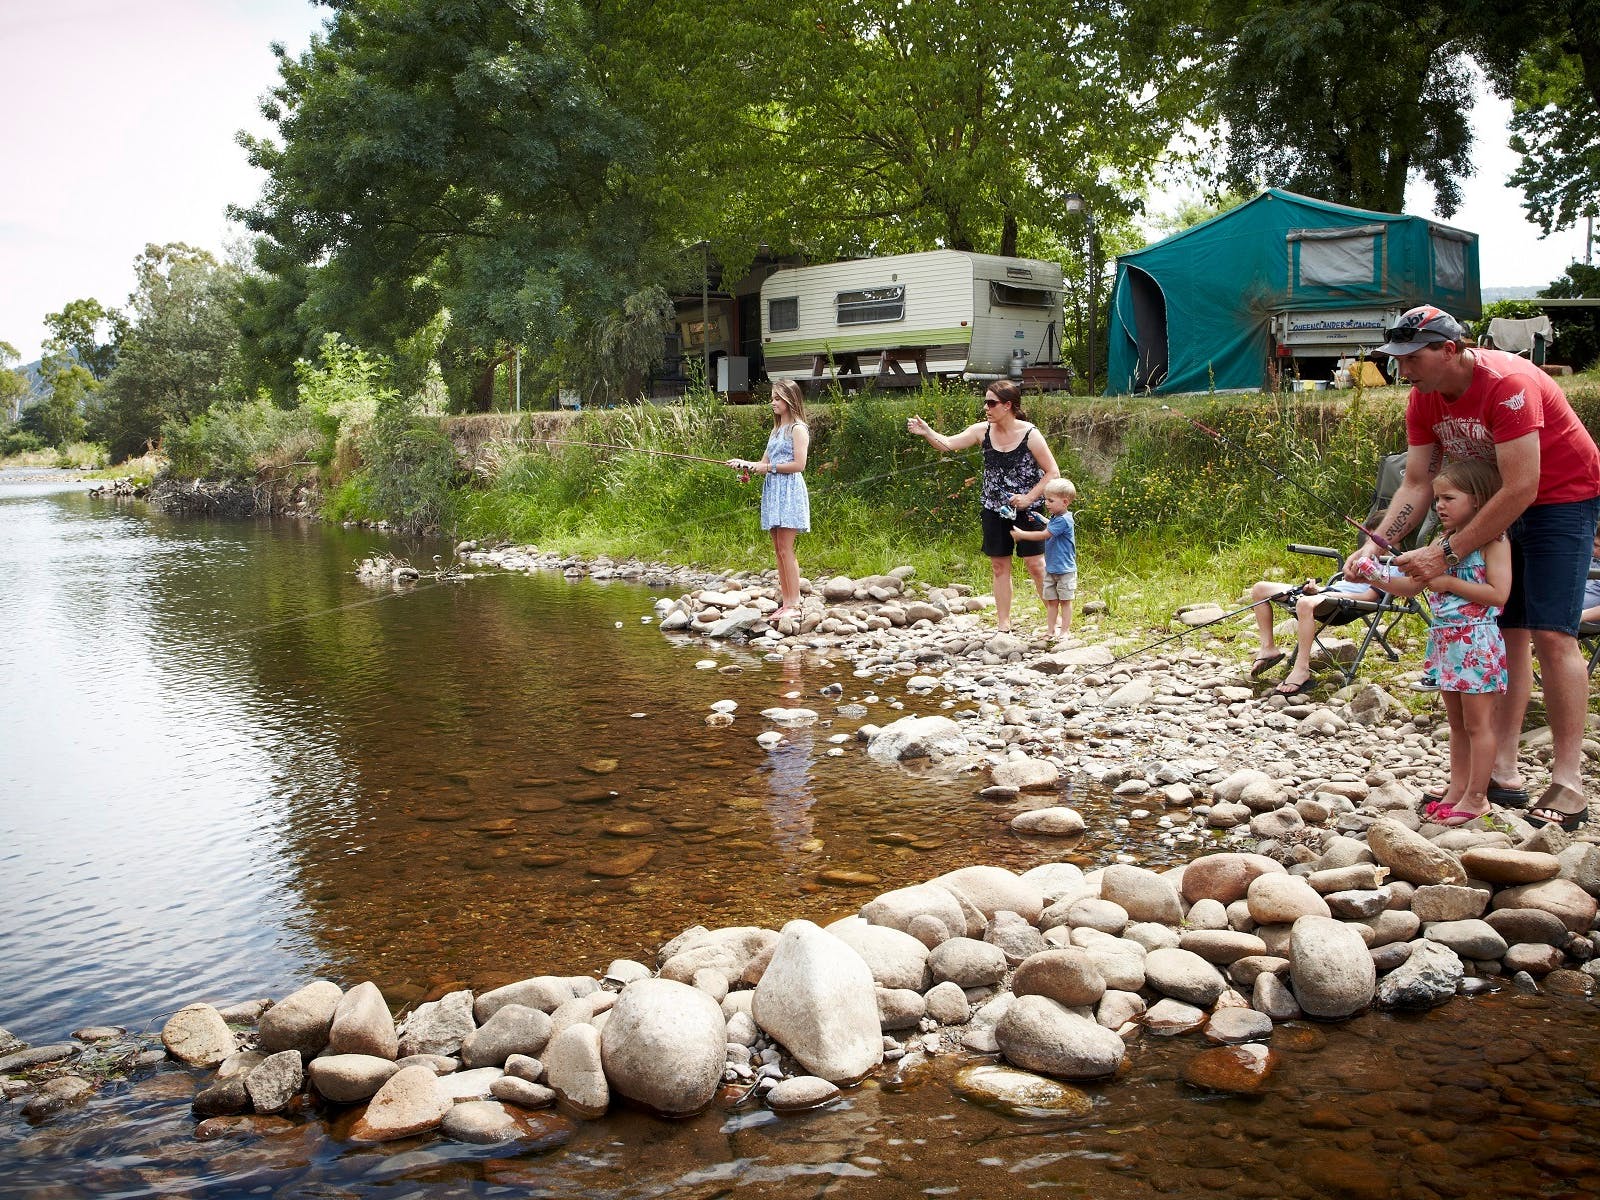 2 adults and 3 kids, fishing off the rocky bank by the river, caravans, tents, sunny day.